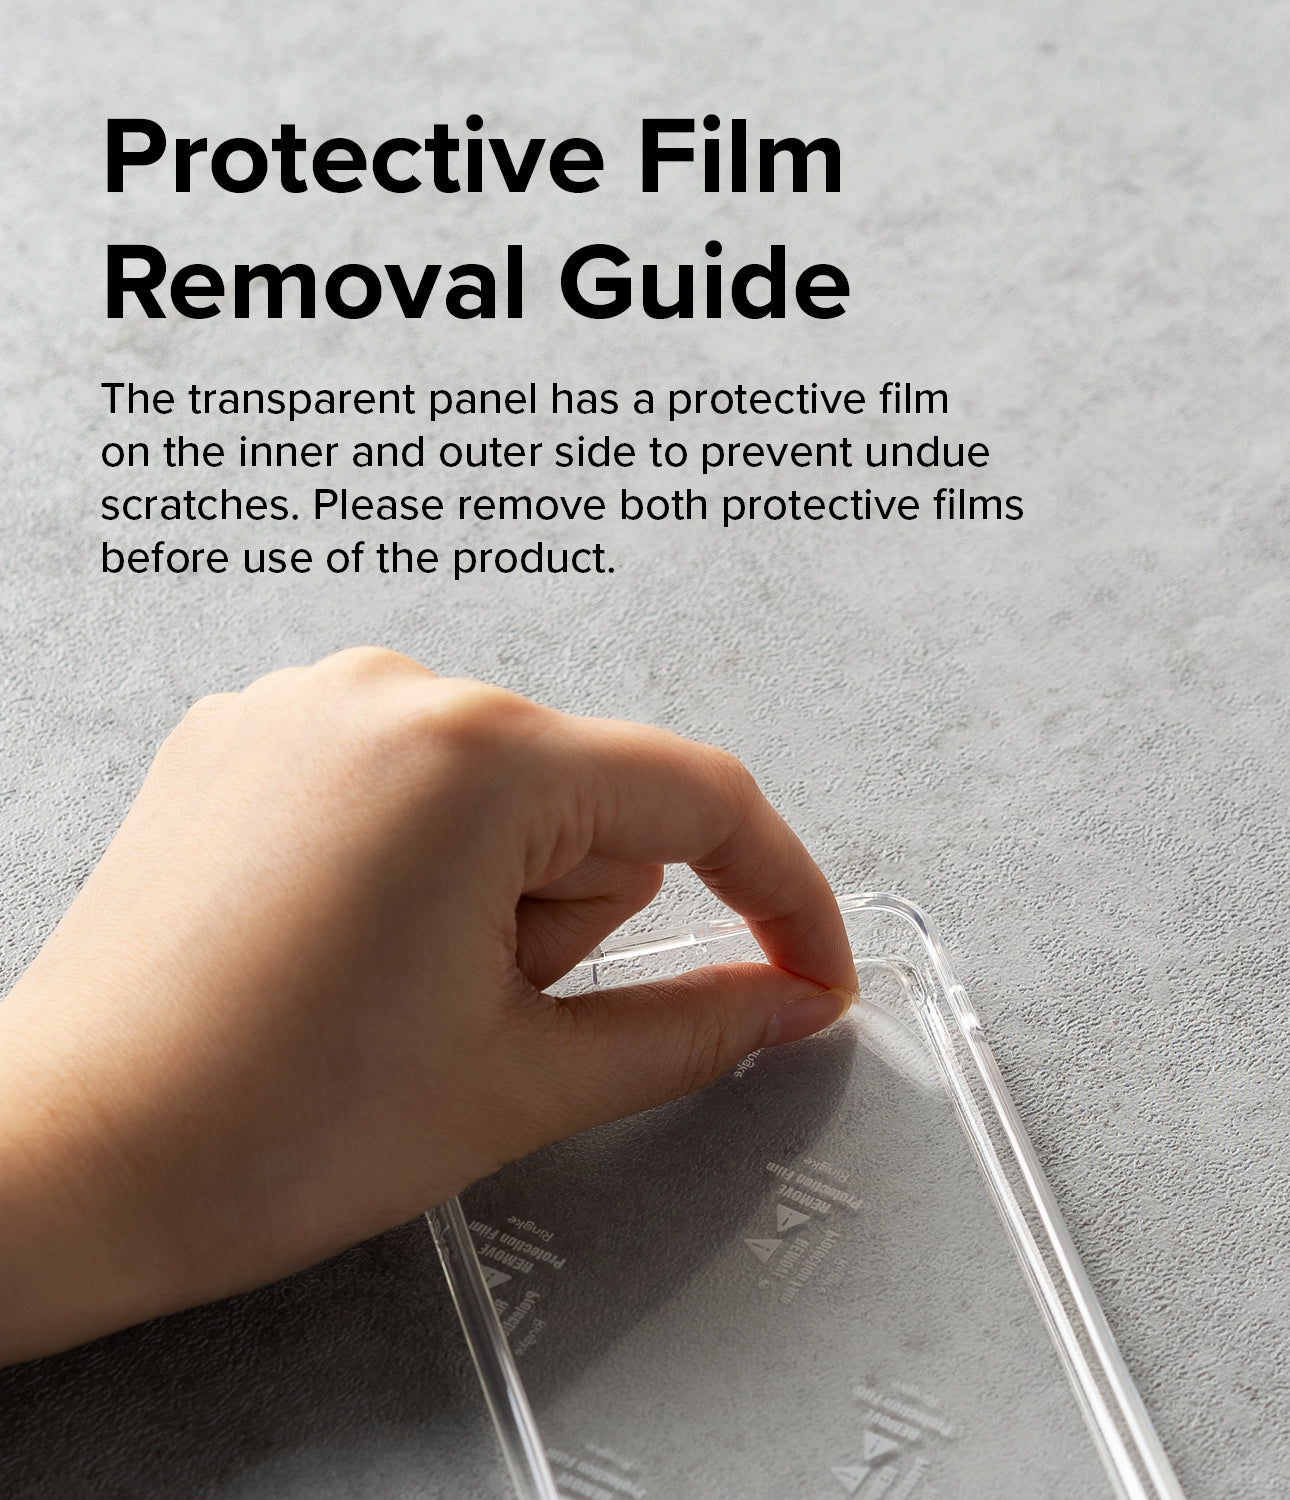 Protective Film Removal Guide - The transparent panel has a protective film on the inner and outer side to prevent undue scratches. Please remove both protective films before use of the product.